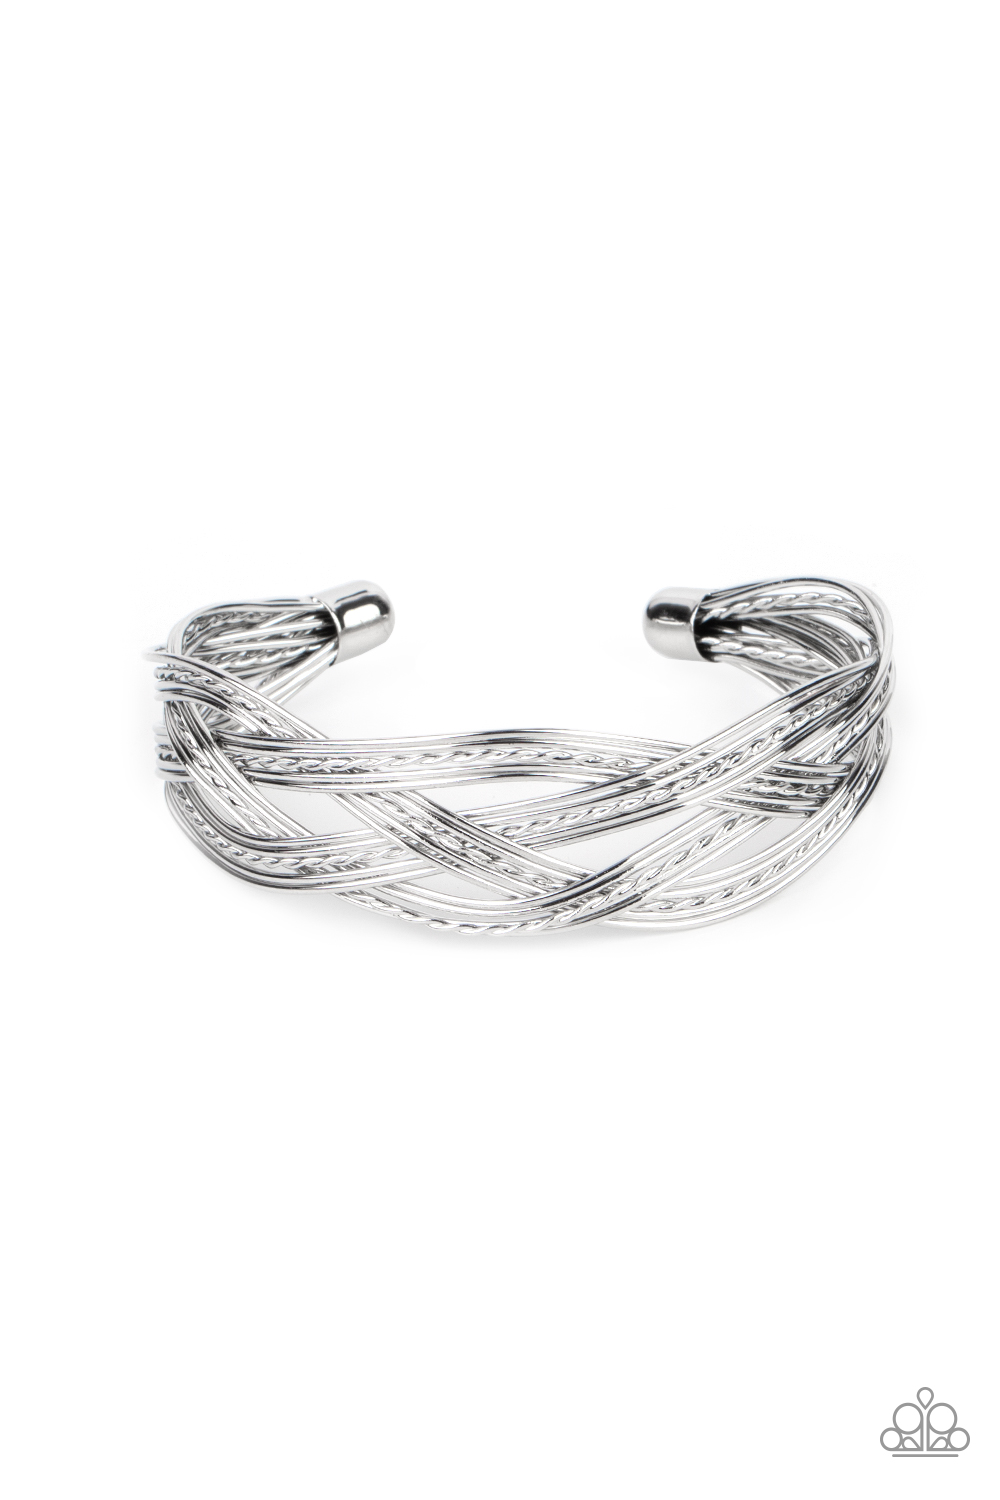 Paparazzi Accessories: Get Your Wires Crossed - Silver | Paparazzi ...